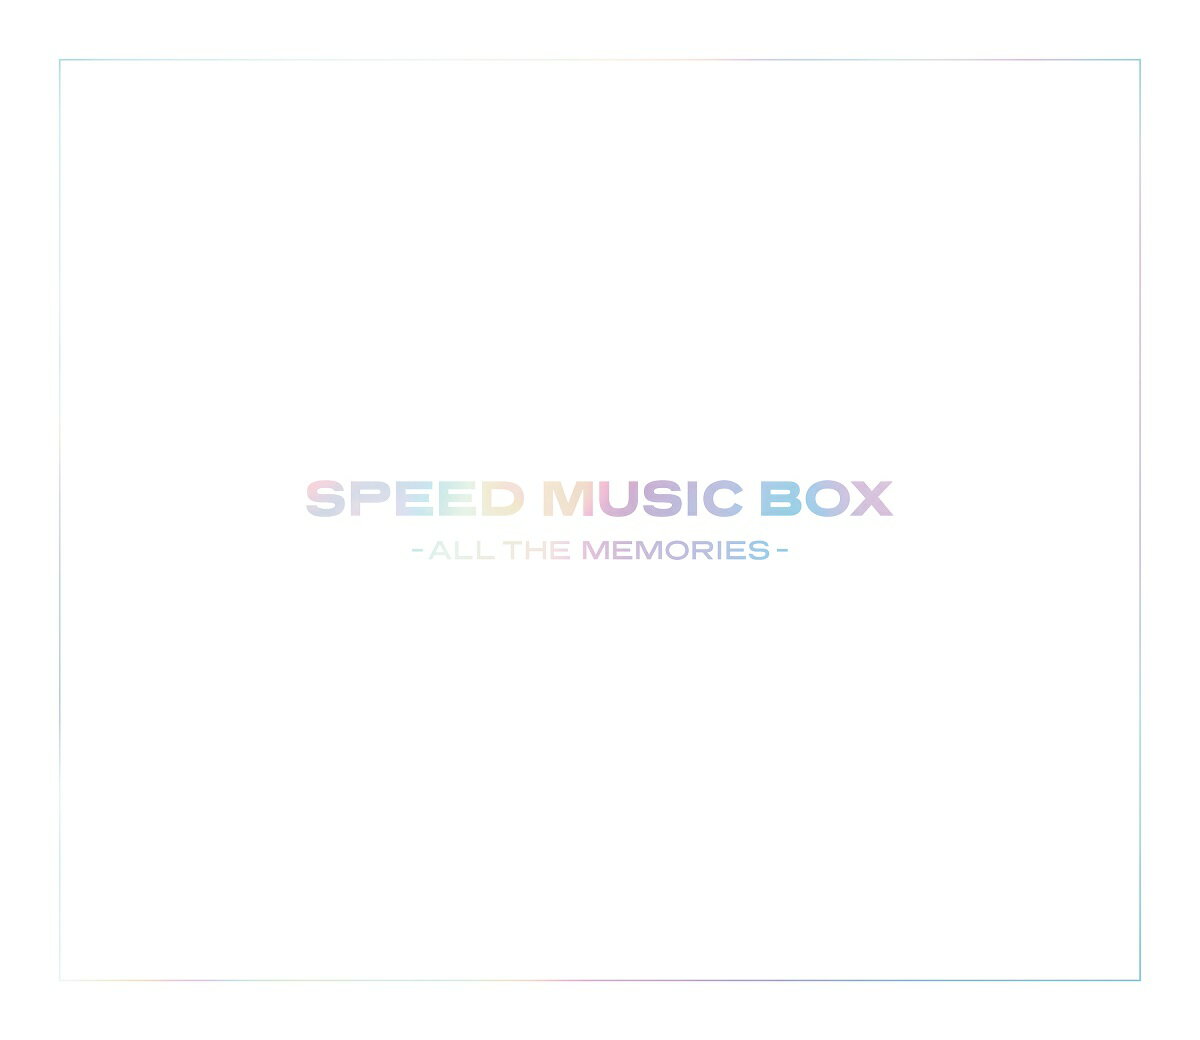 SPEED MUSIC BOX - ALL THE MEMORIES -